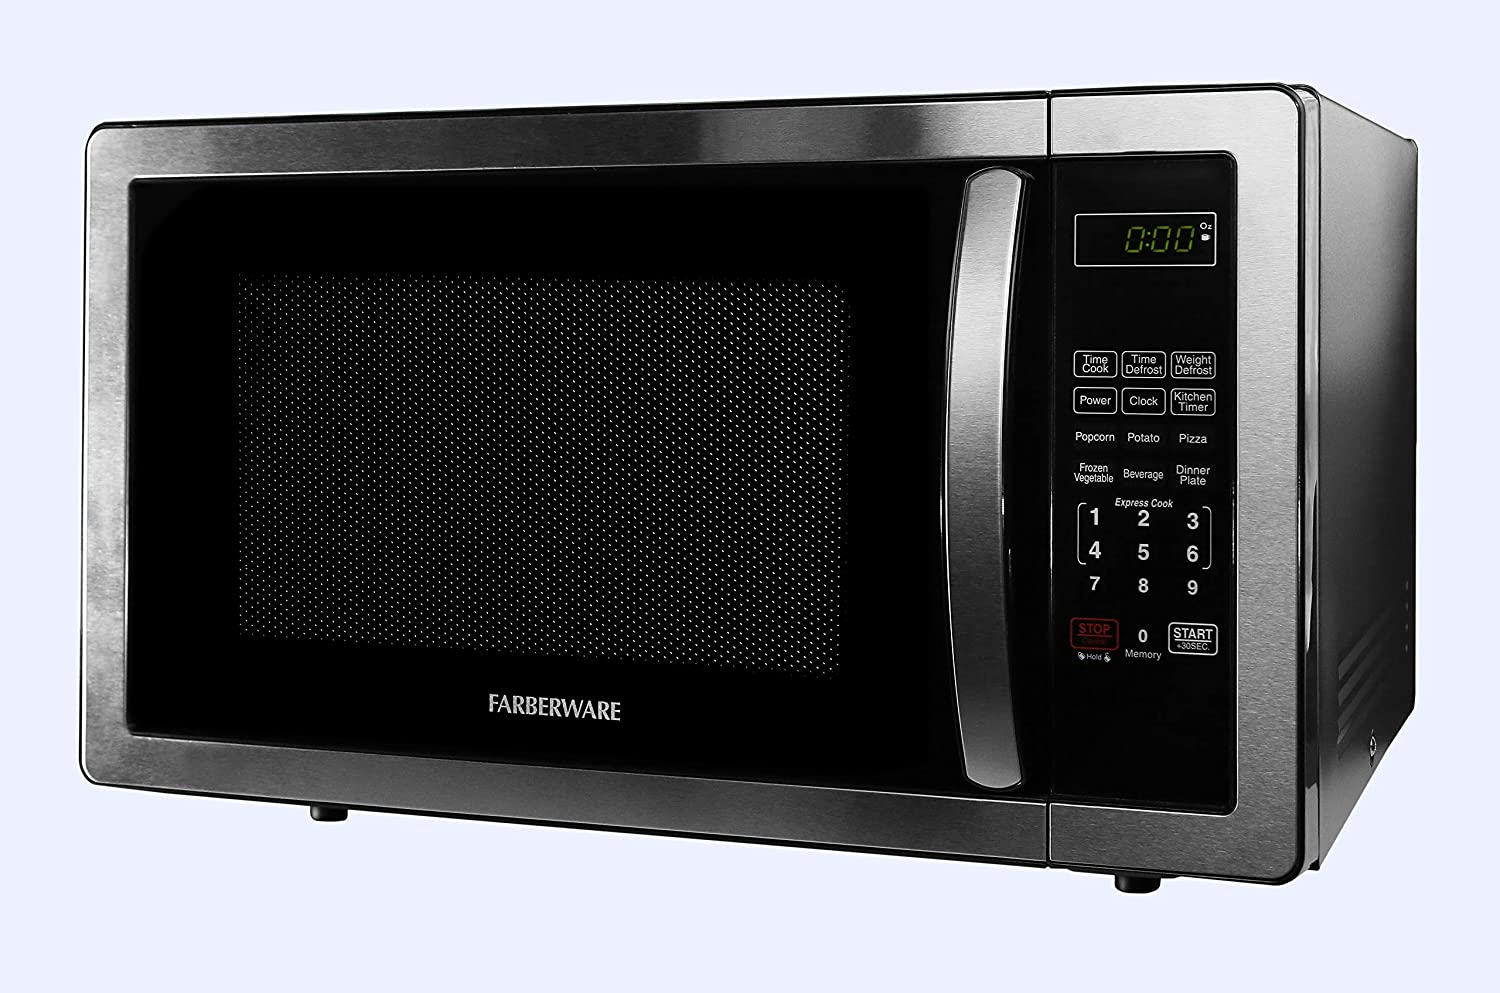 https://discounttoday.net/wp-content/uploads/2022/09/Farberware-FMO11AHTBKB-Countertop-Microwave-1.1-Cu.-Ft.-1000-Watt-Compact-Microwave-Oven-with-LED-lighting-Child-lock-and-Easy-Clean-Interior-Stainless-Steel-Interior-Exterior8.jpg